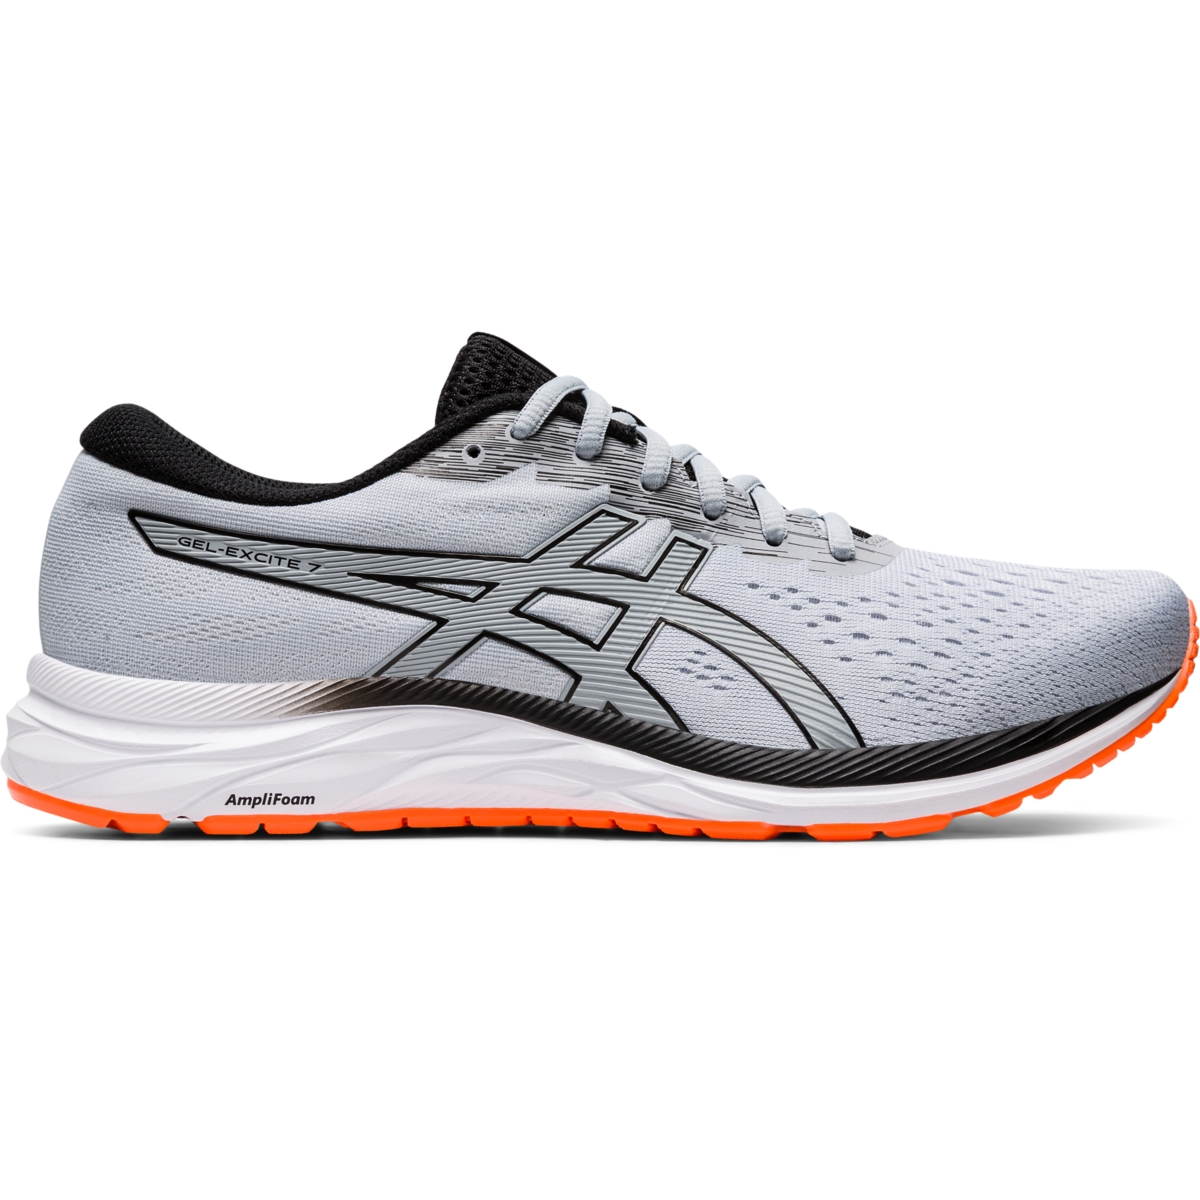 ASICS Men's GEL-EXCITE 7 Running Shoes 1011A657